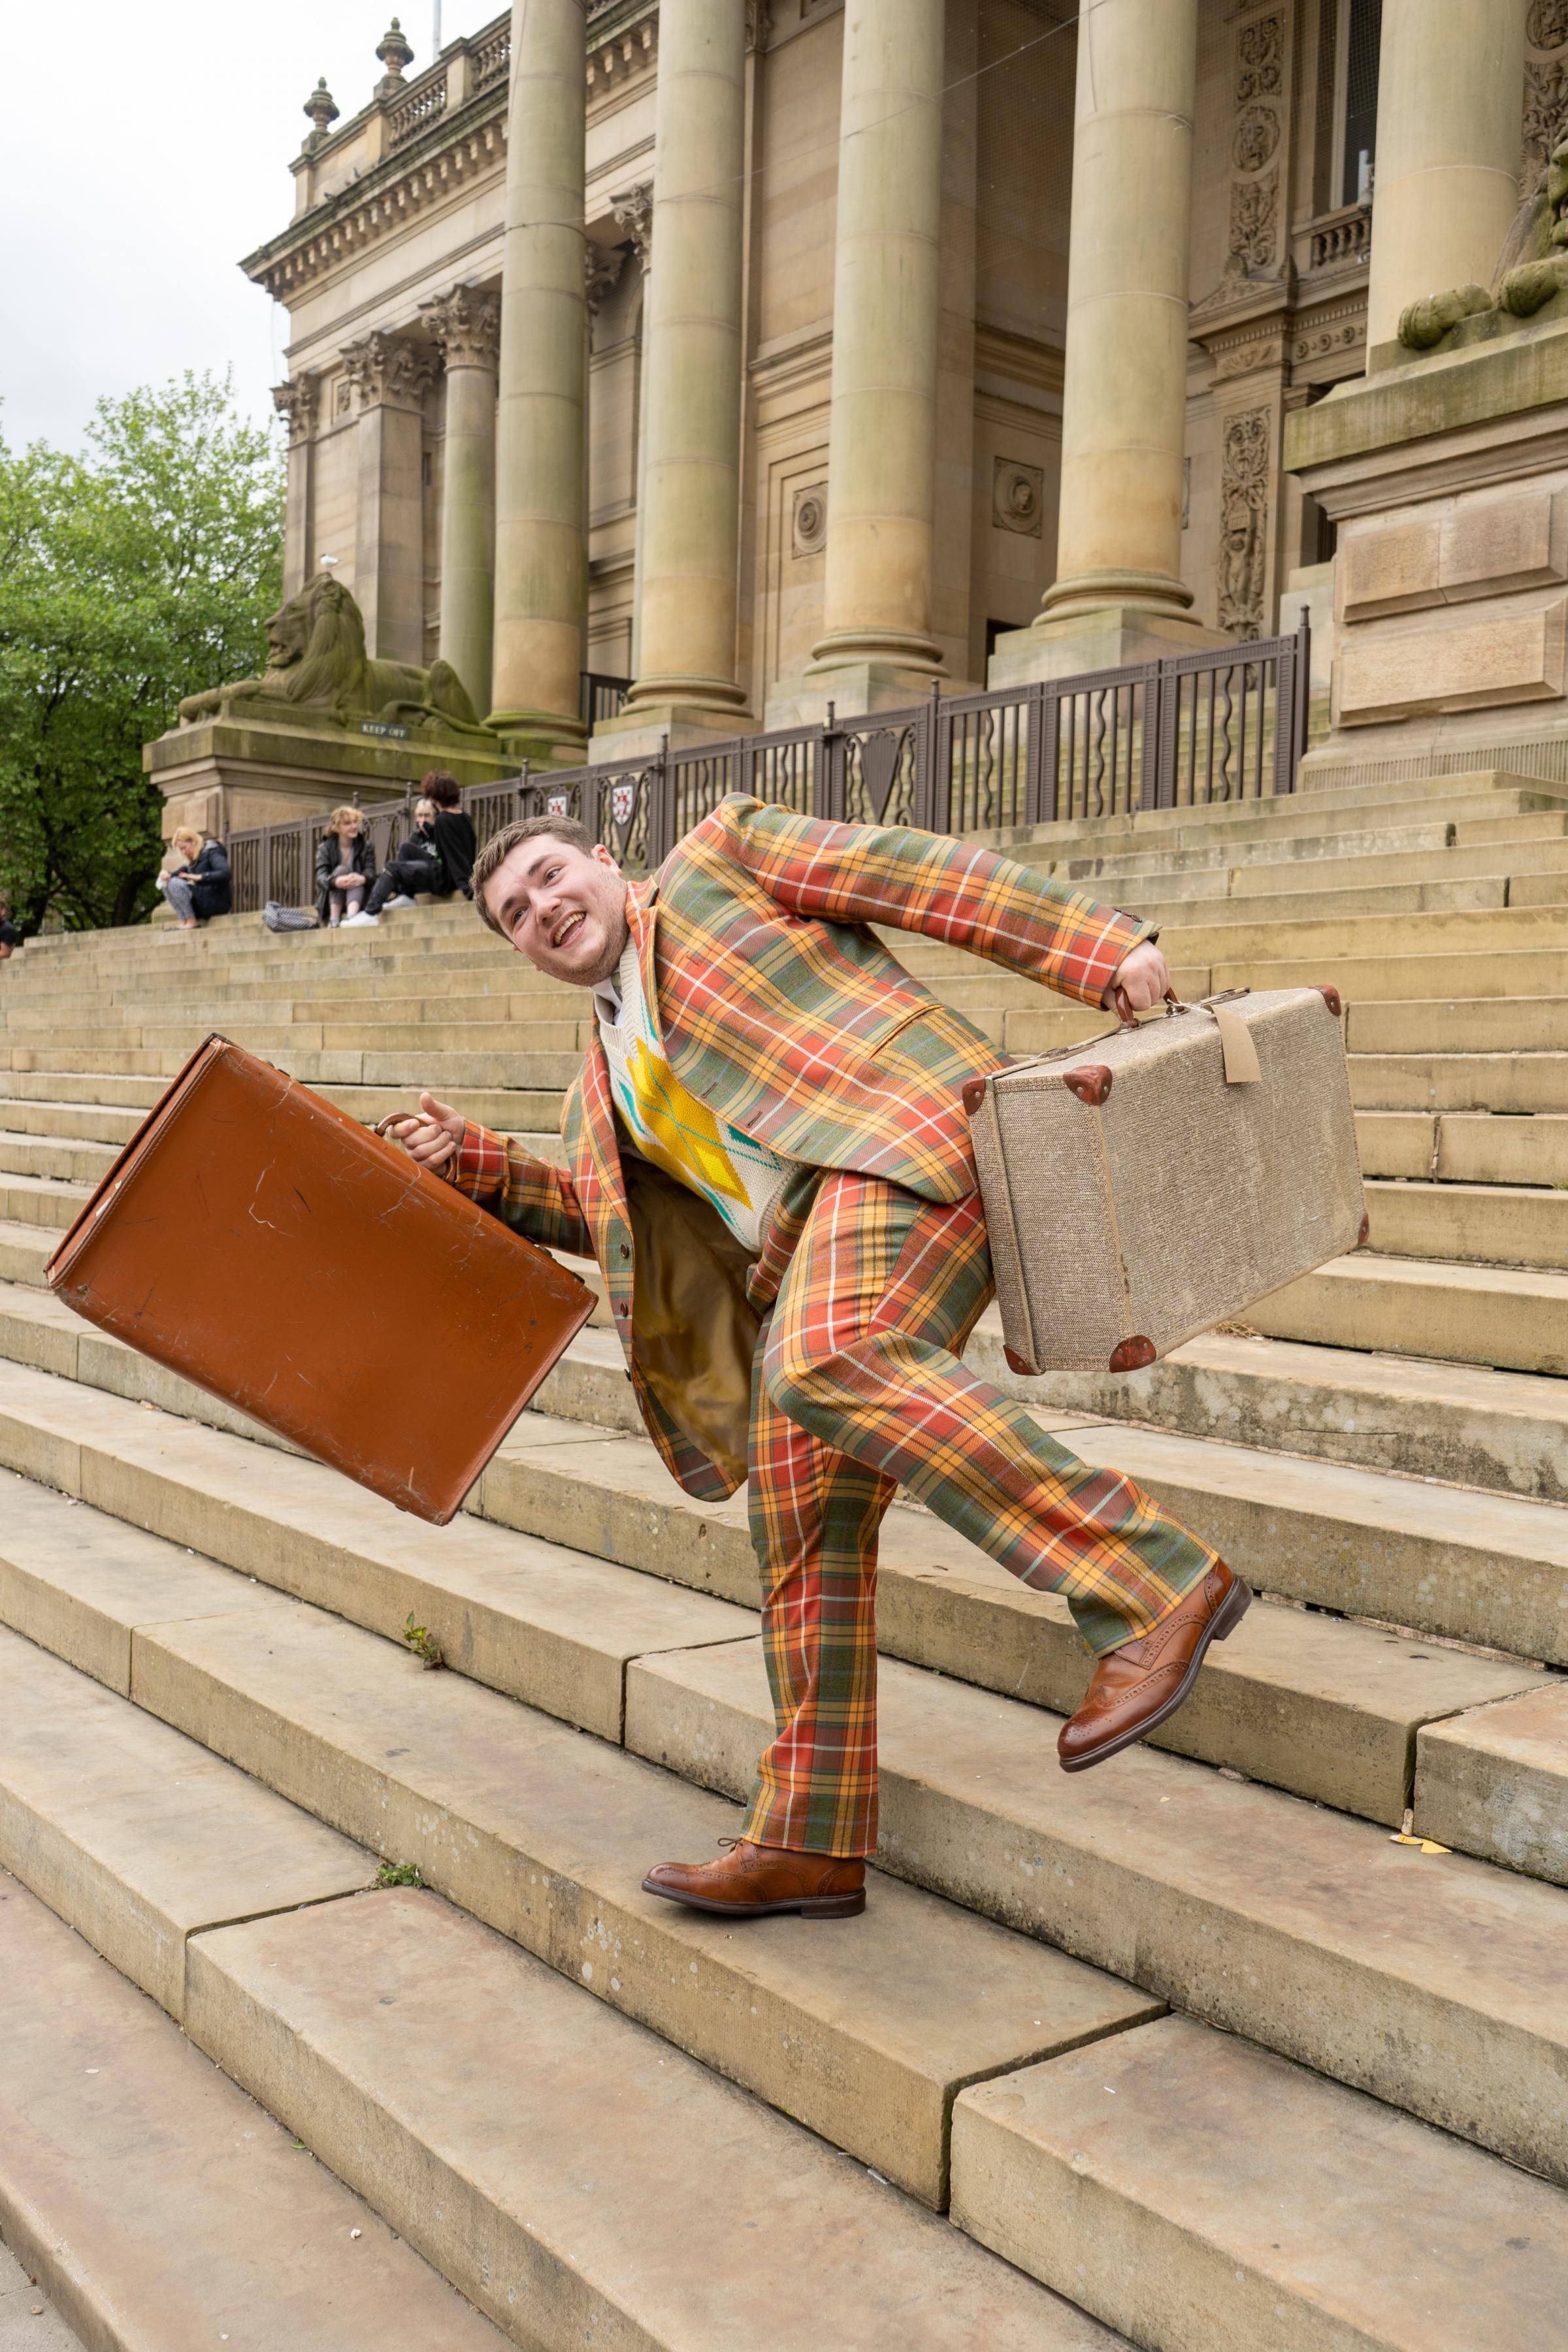 Jordan Pearson in Bolton for One Man, Two Guvnors at the Octagon